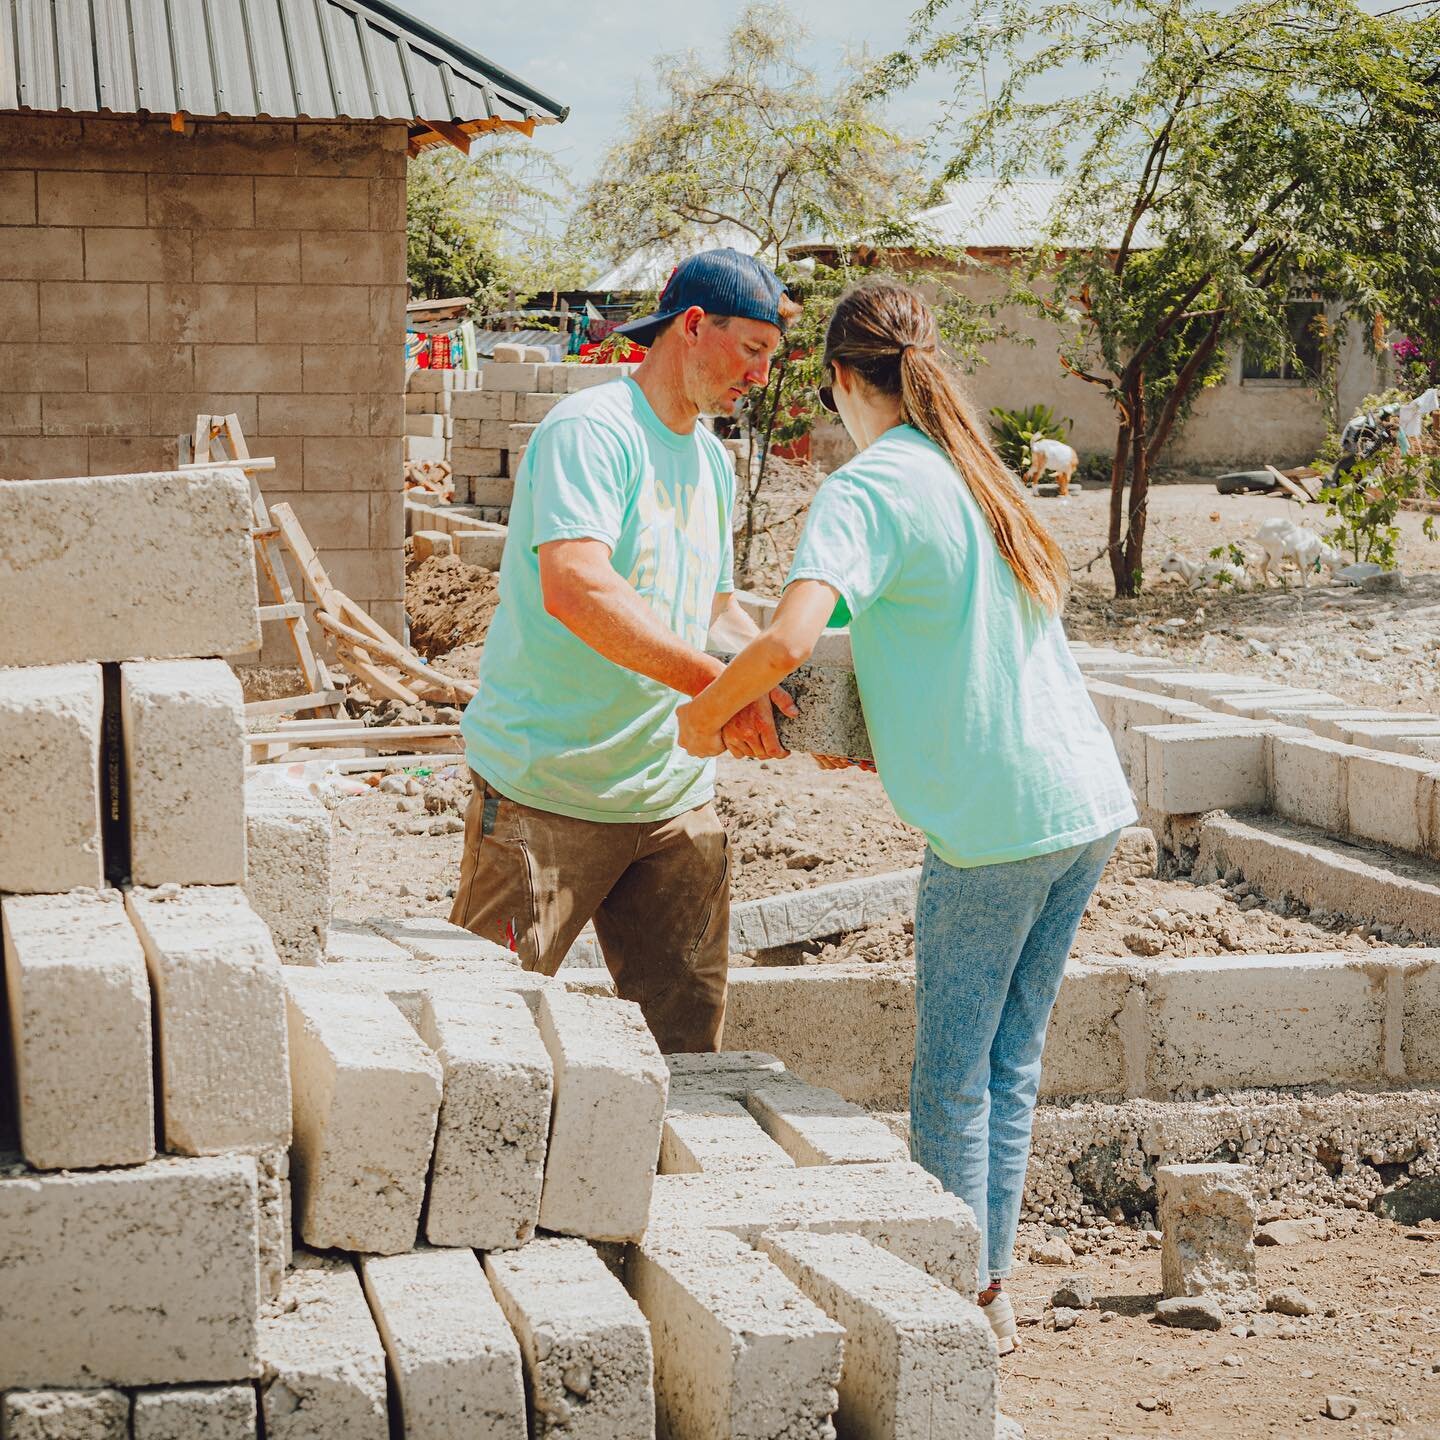 Teamwork makes the dreams work! We are so thankful for our team of volunteers who spent their time lifting heavy blocks to help us build a wall on our school campus!